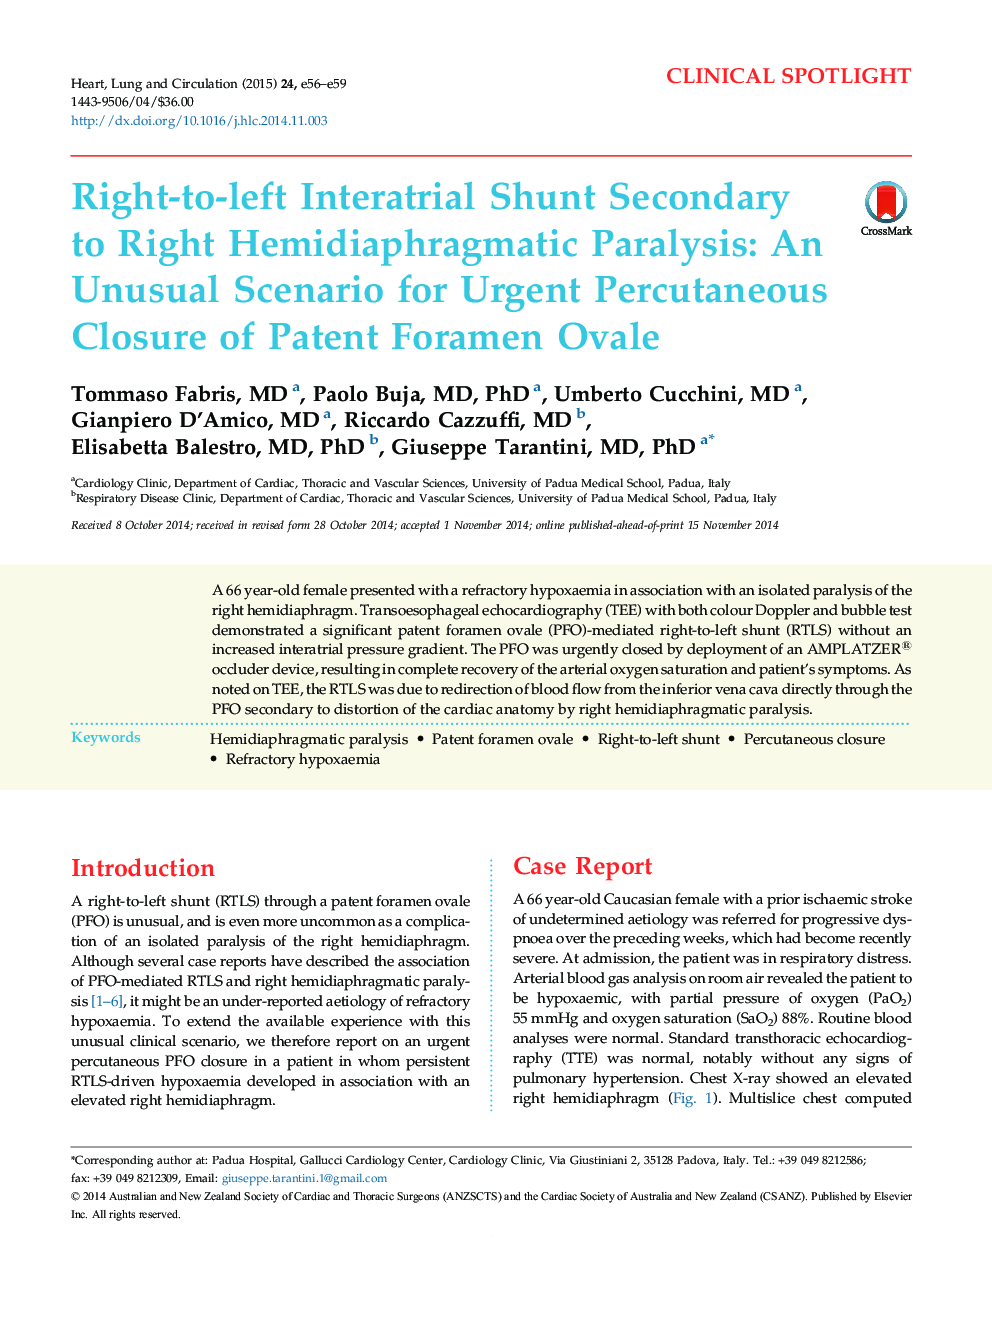 Right-to-left Interatrial Shunt Secondary to Right Hemidiaphragmatic Paralysis: An Unusual Scenario for Urgent Percutaneous Closure of Patent Foramen Ovale